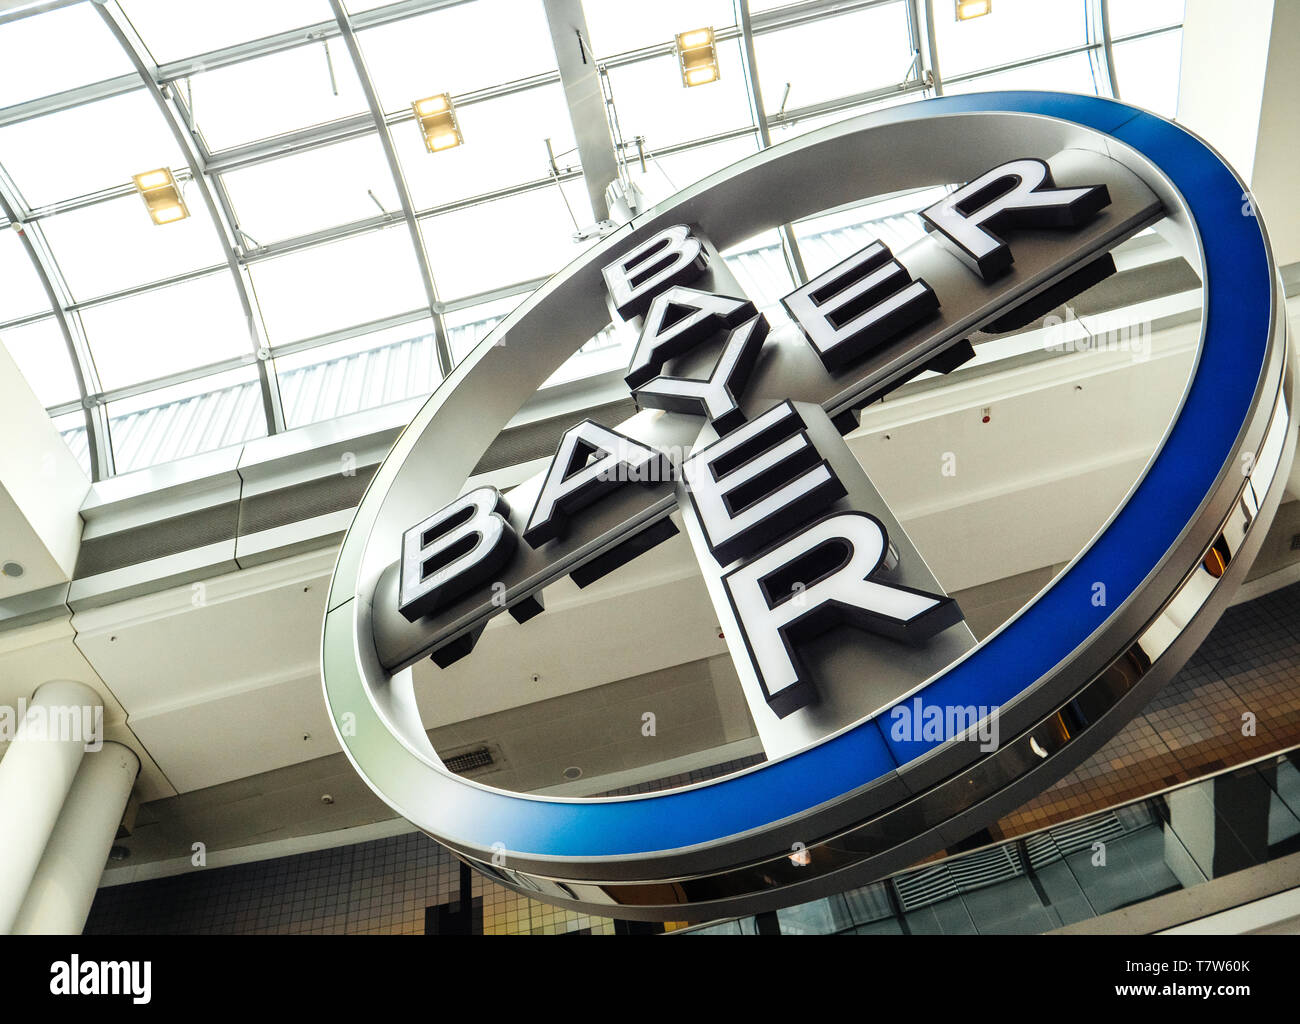 Frankfurt, Germany - Apr 29, 2019: Large Bayer German multinational pharmaceutical and life sciences company logotype hanged and rotation in Terminal 1 in Frankfurt International Airport Stock Photo